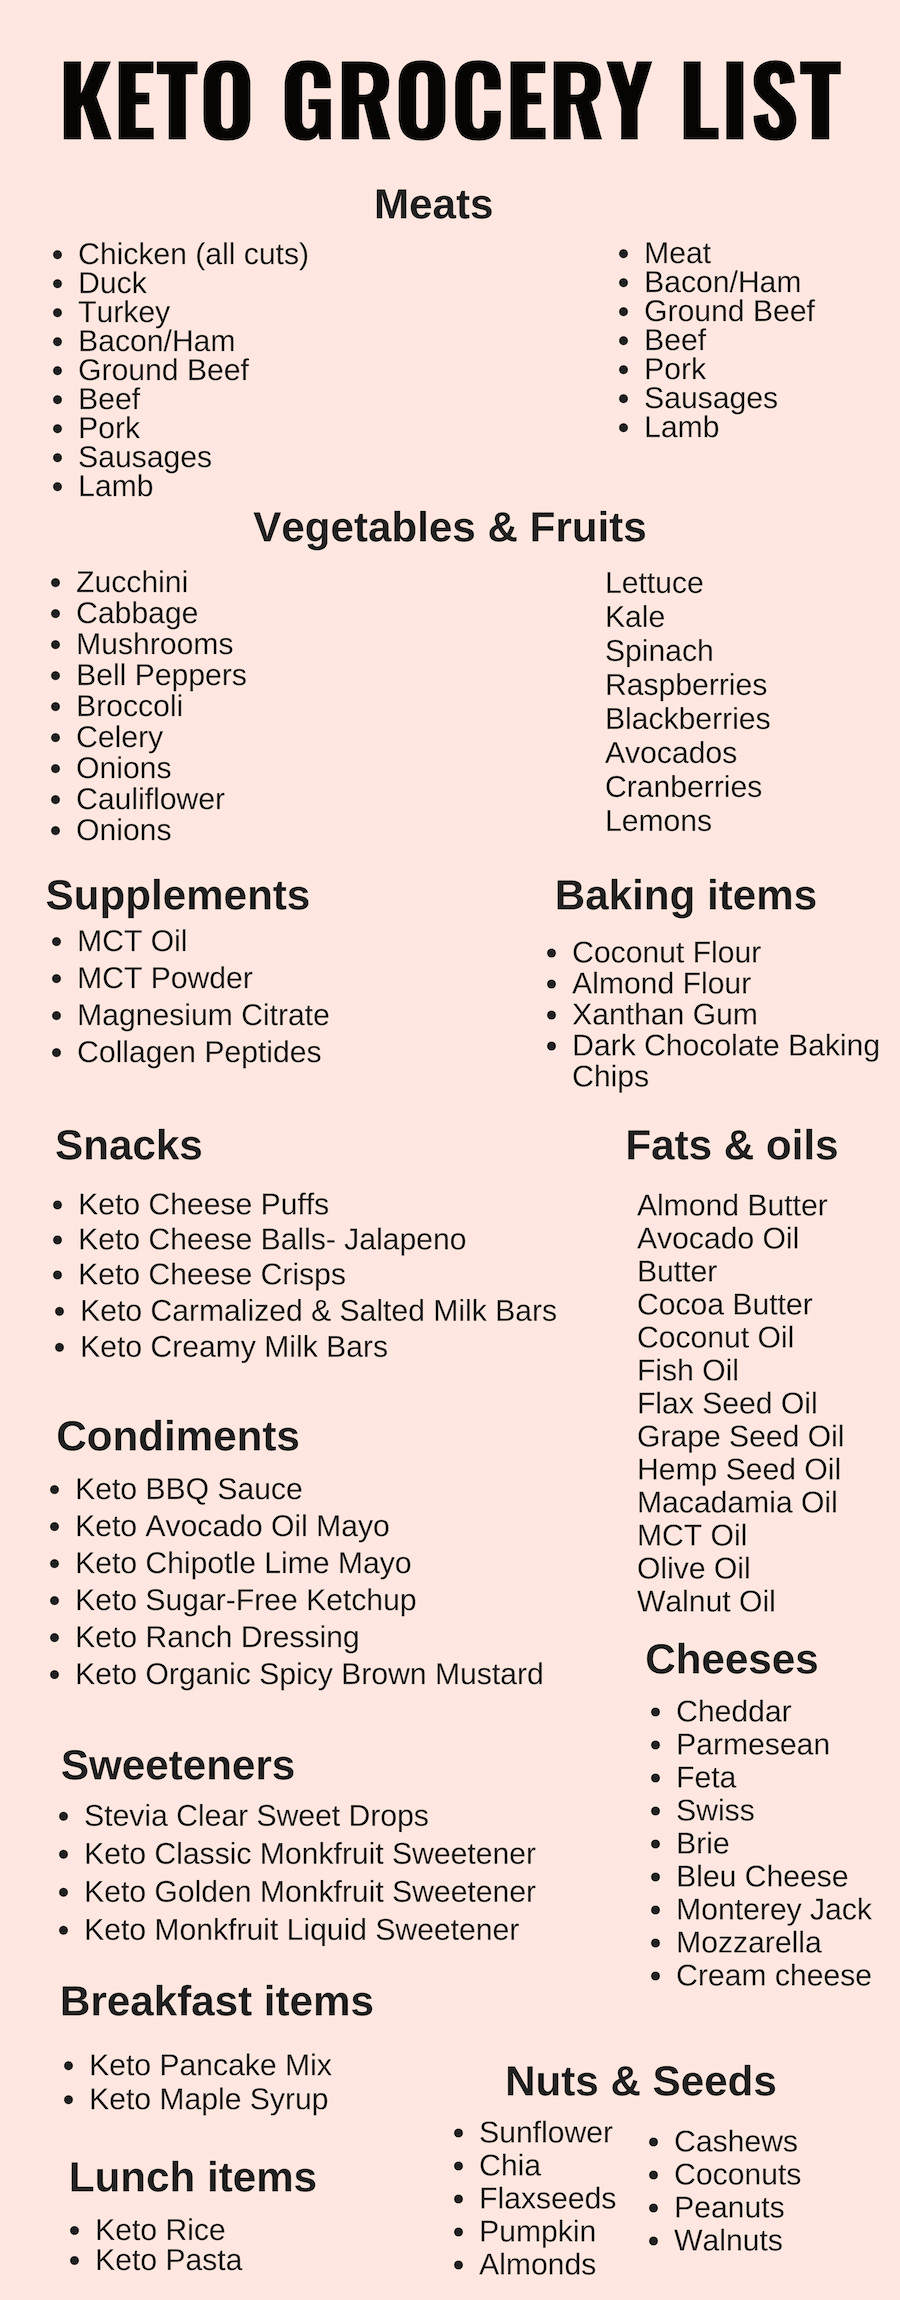 Keto Diet For Beginners Losing Weight Grocery List
 Keto Grocery List For Beginners – Simple Grocery List